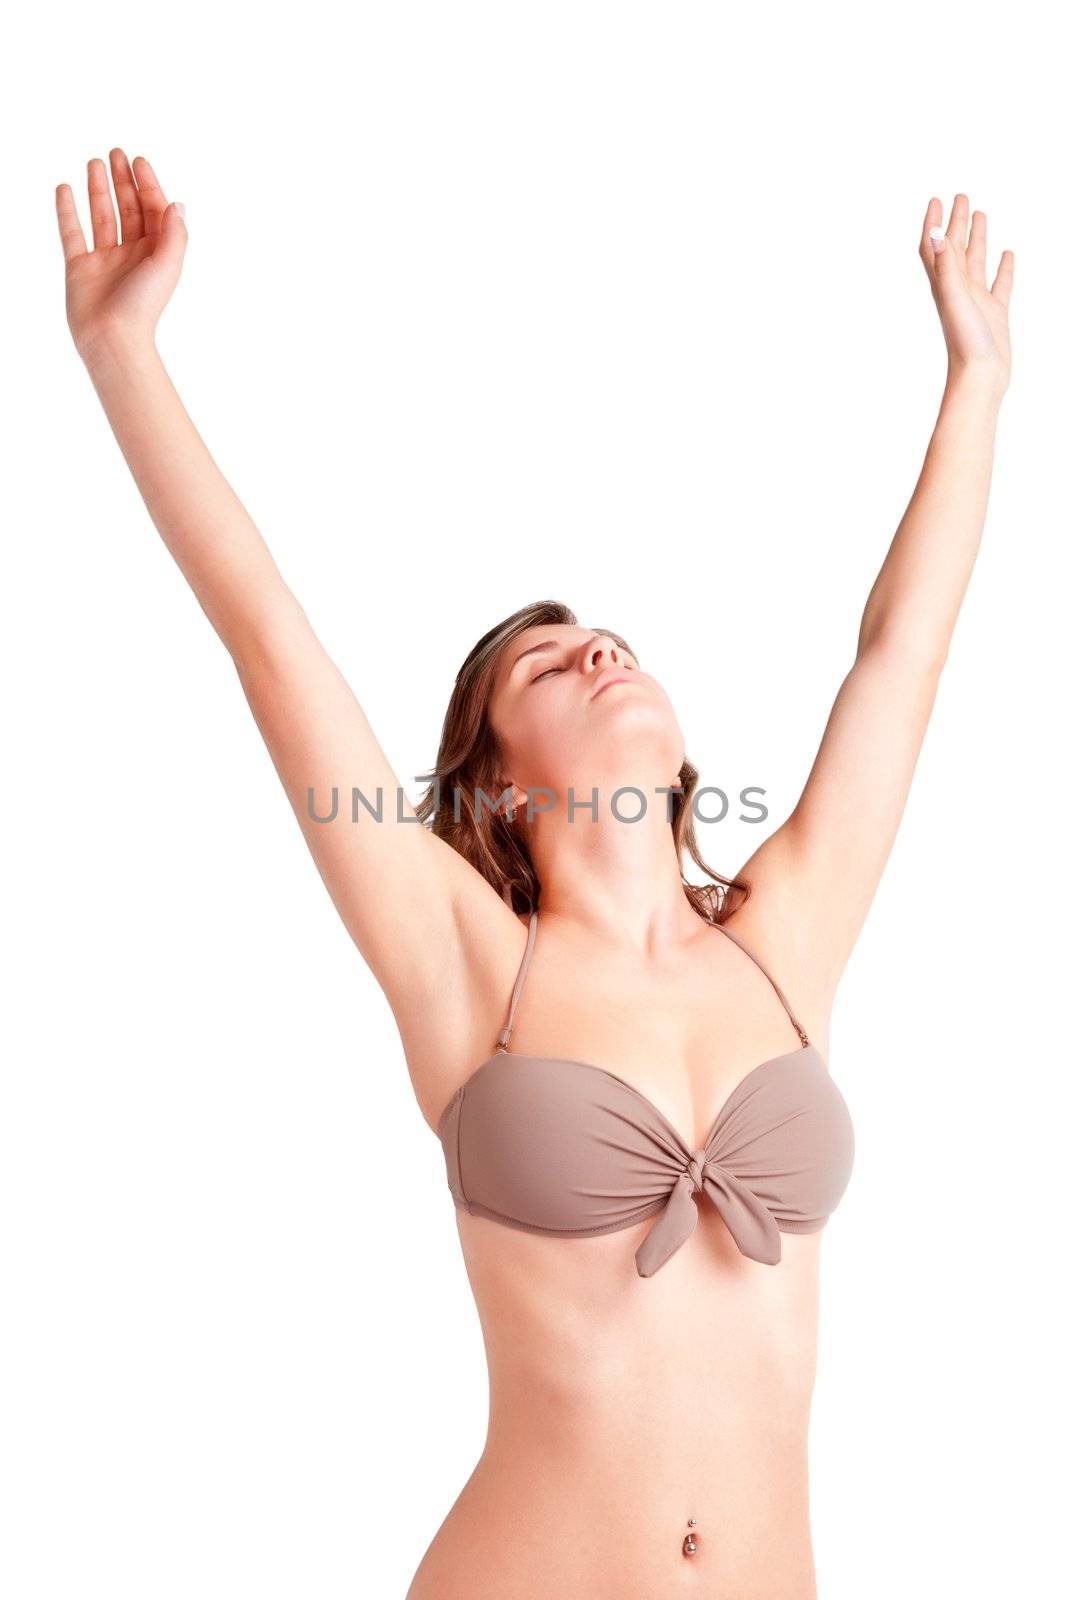 Woman stretching, wearing a bikini, isolated in a white background